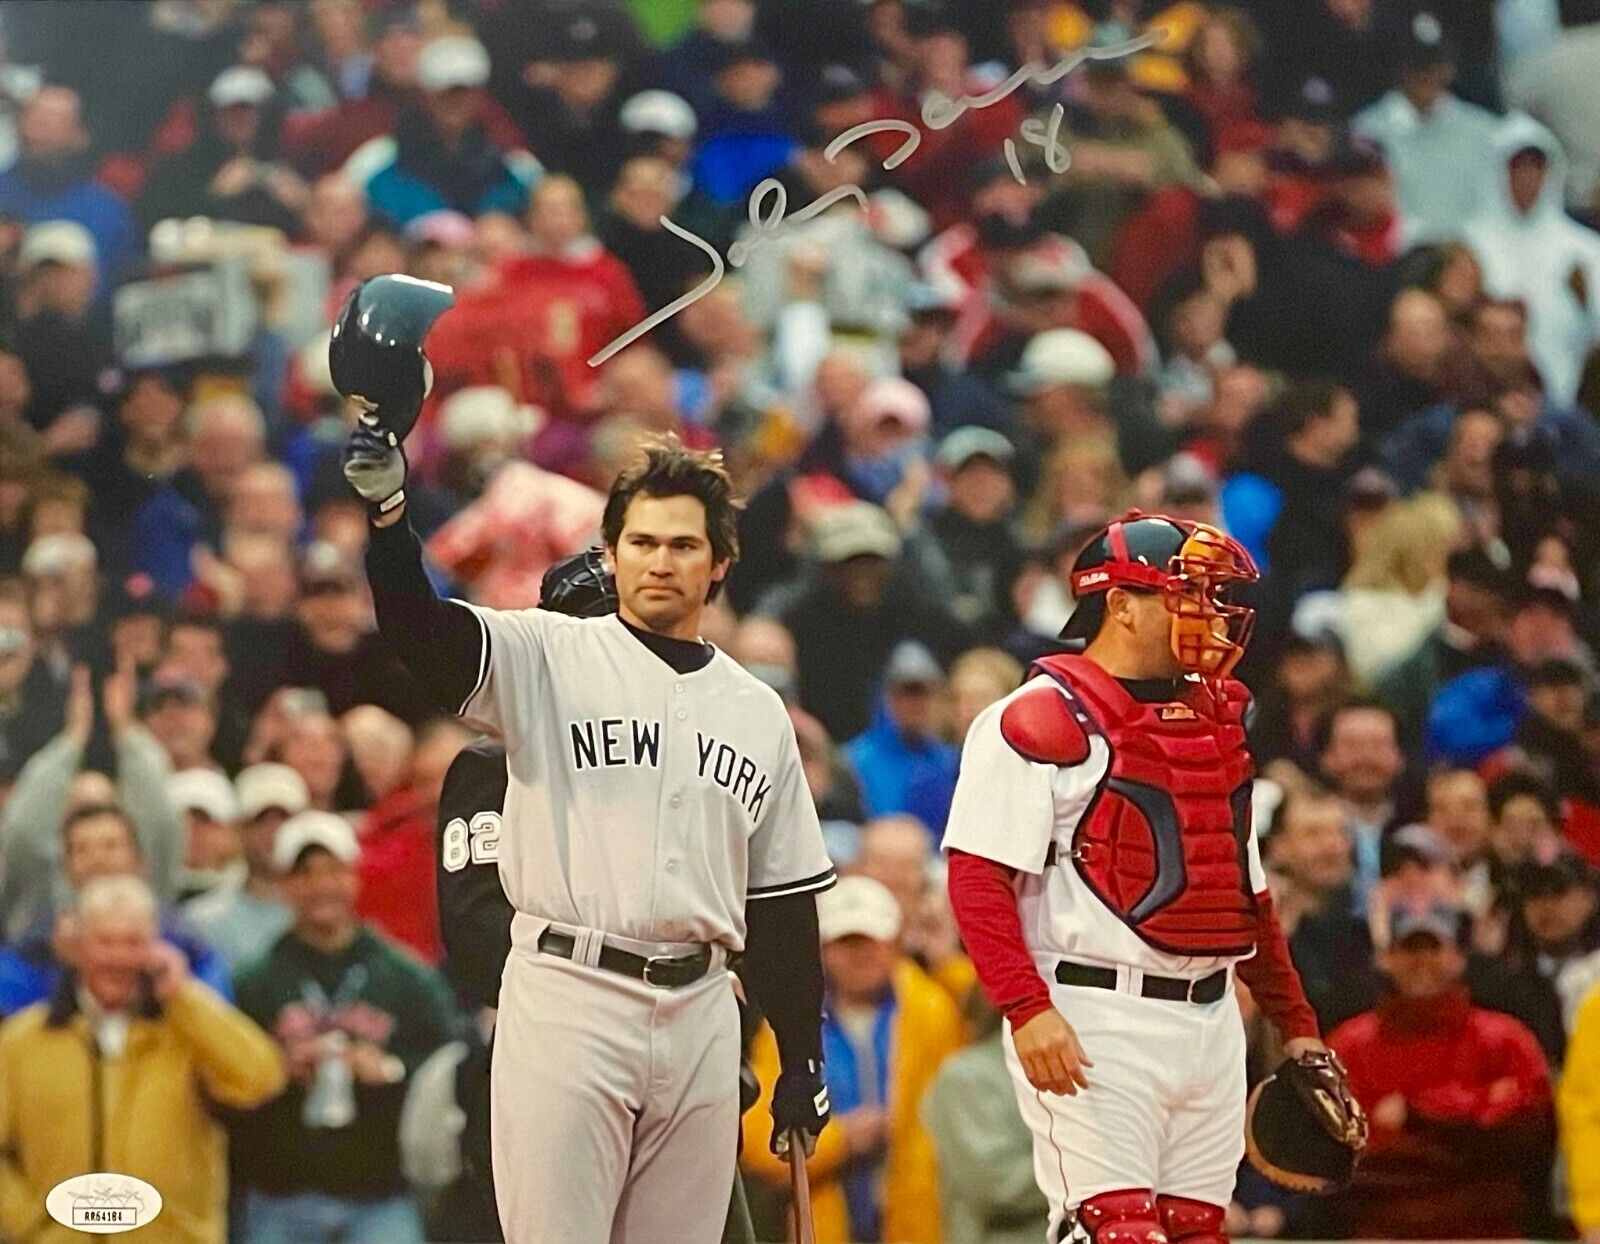 JOHNNY DAMON Autograph SIGNED 11x14 Photo Poster painting N.Y. YANKEES FENWAY PARK RETURN JSA